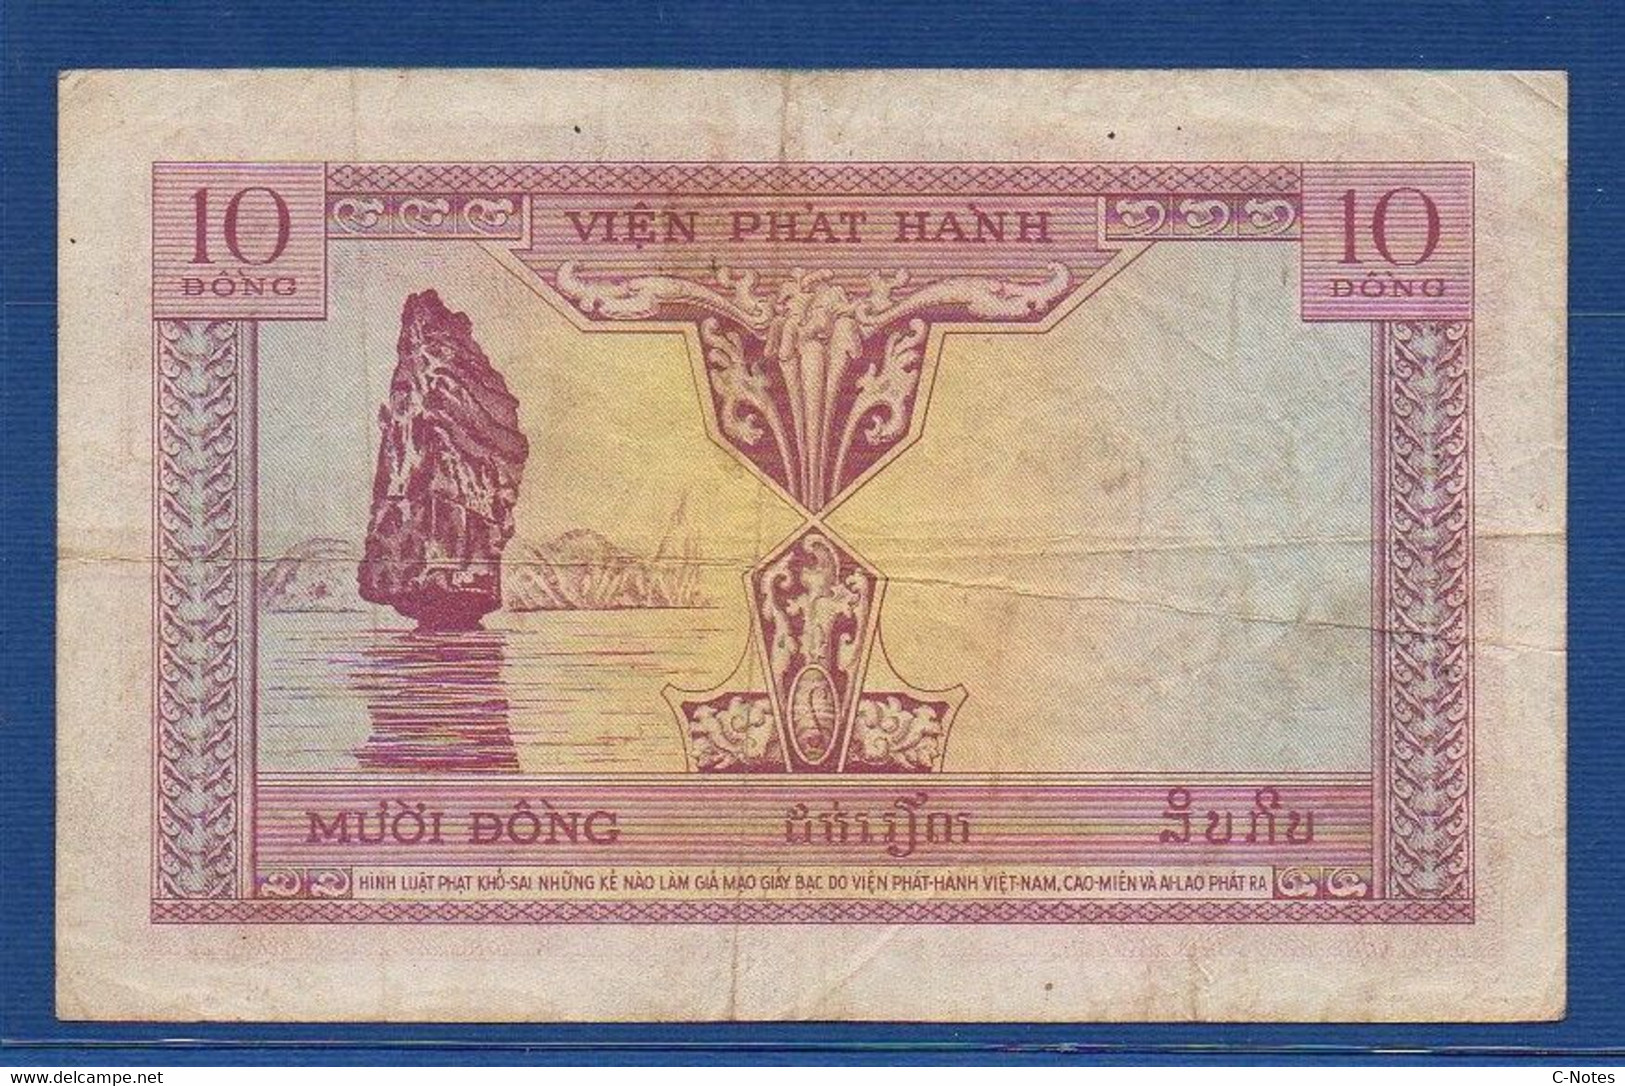 FRENCH INDOCHINA - P.107 –  10 Piastres / Dong ND (1953) F/VF, Serie R18 73957 - Indochina